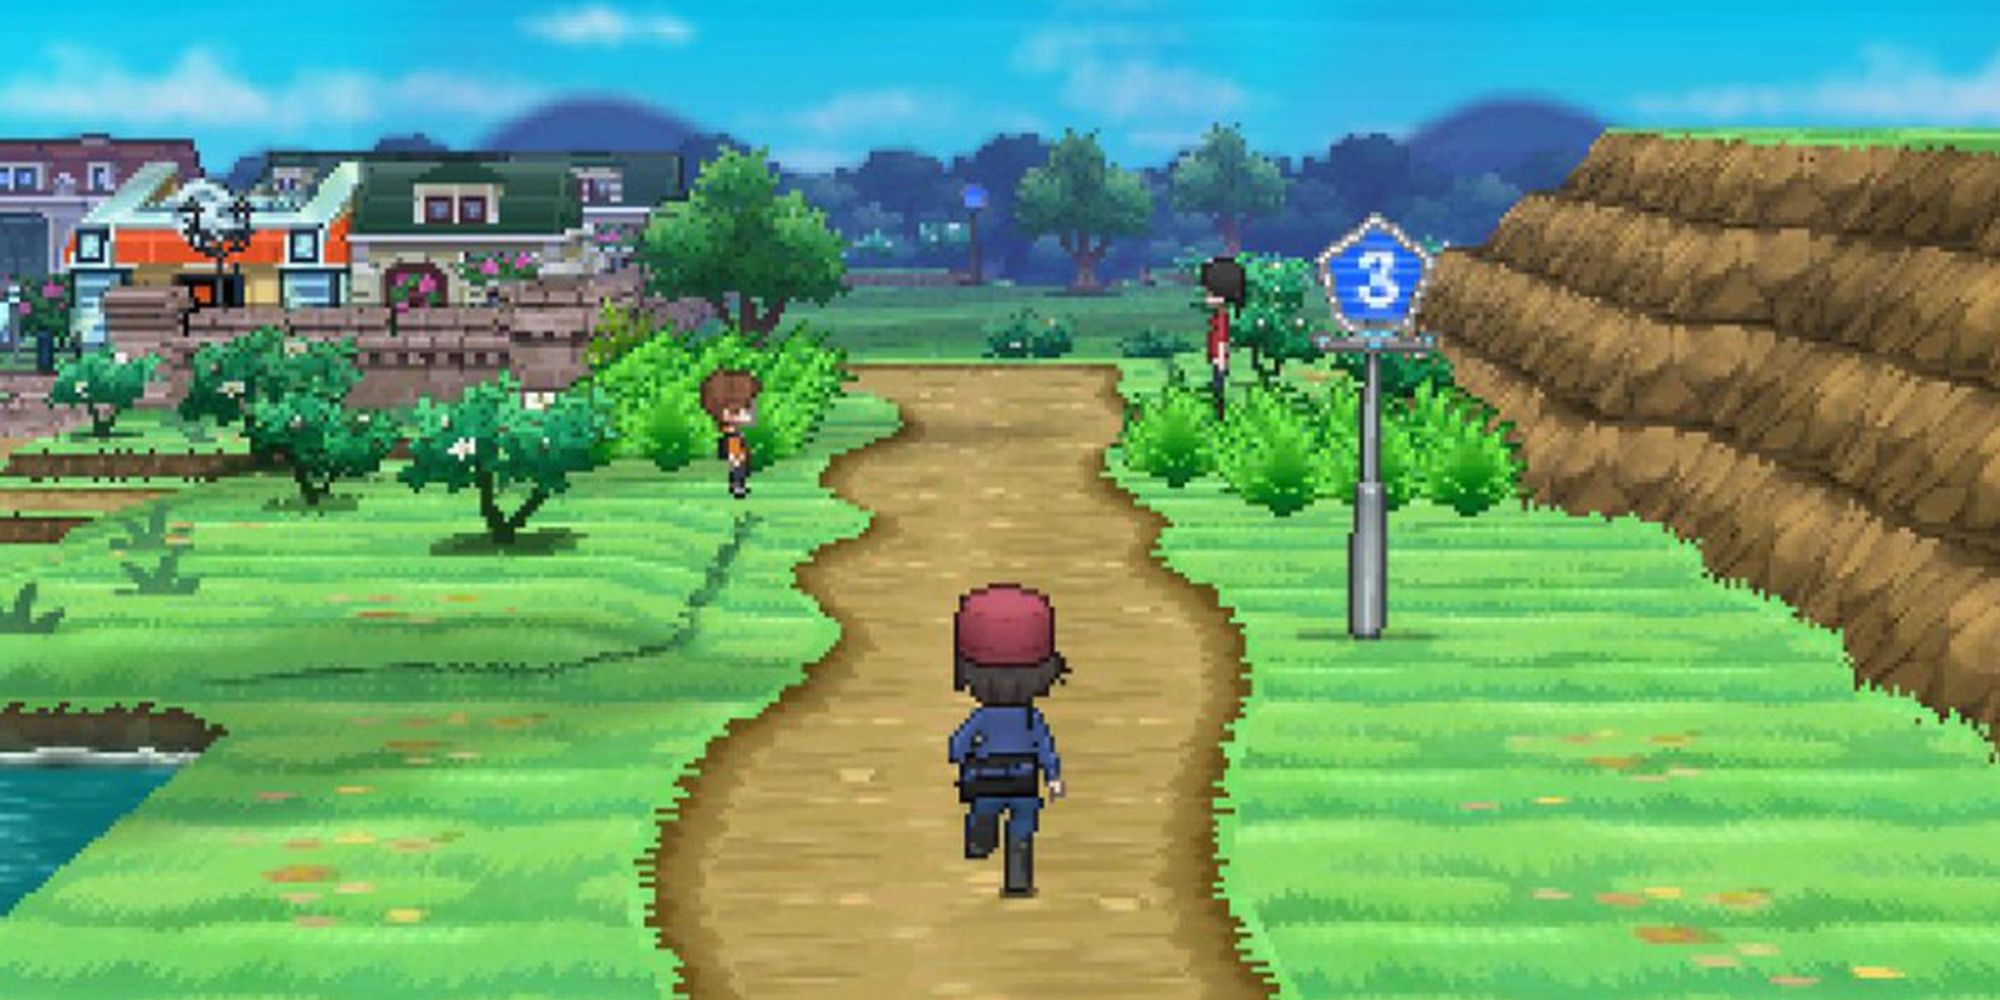 The main character exploring the city with Pokemon X and Y